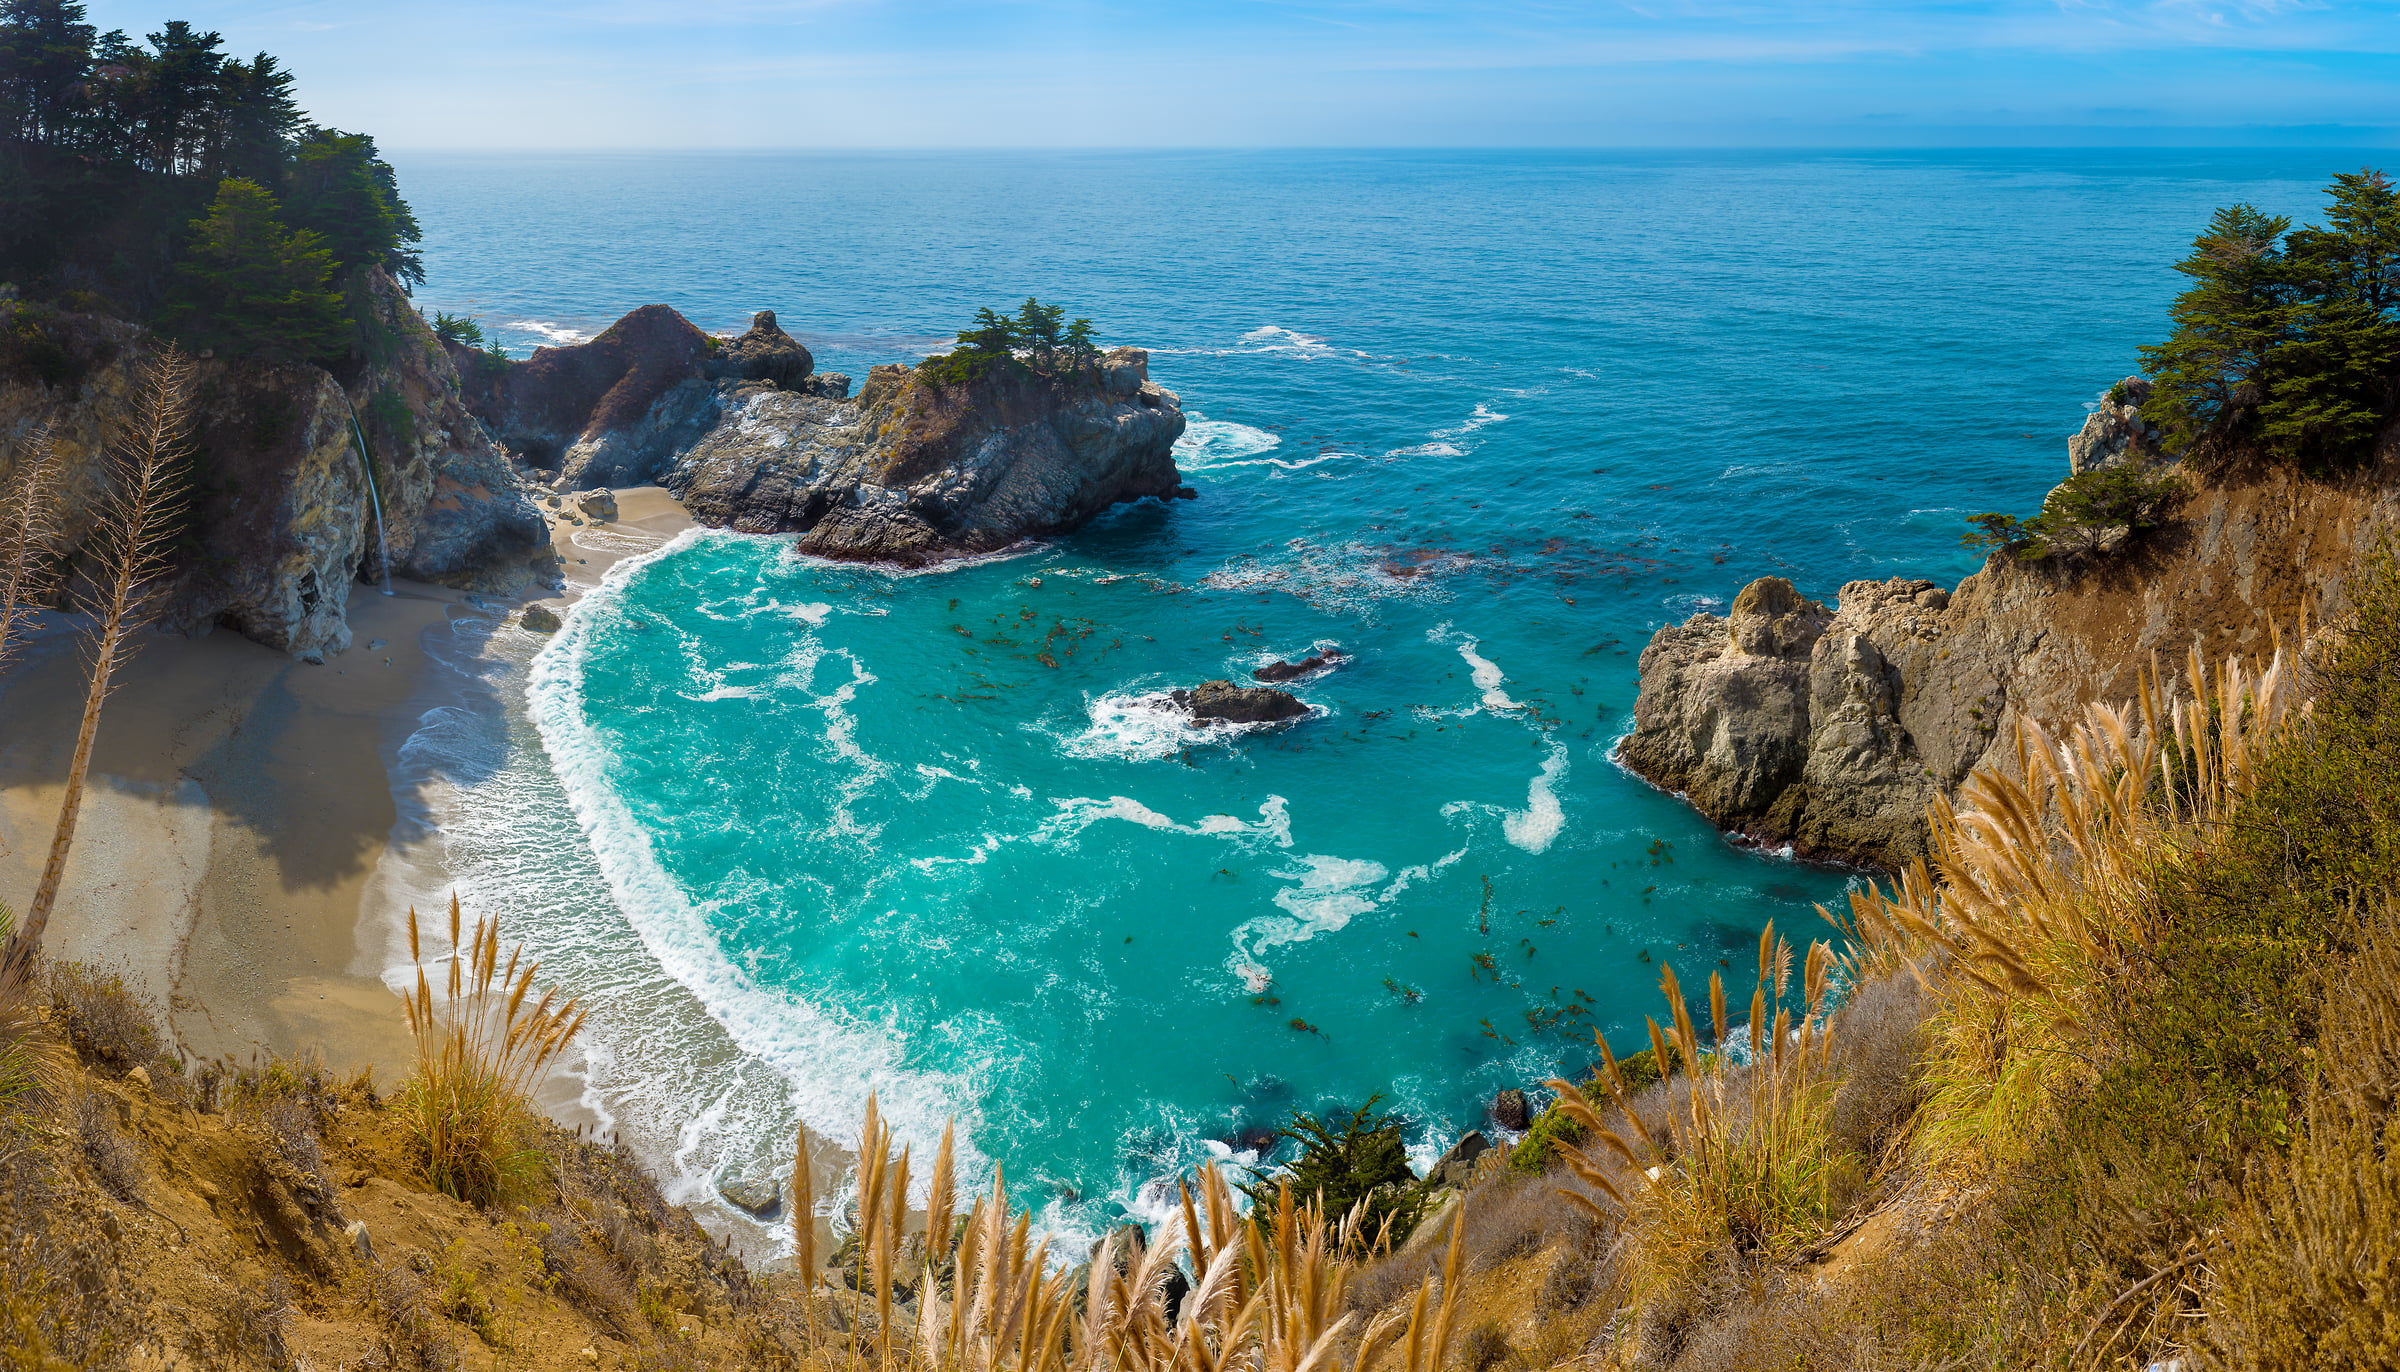 404 megapixels! A very high resolution, large-format VAST photo of a beach, waterfall, and the ocean; fine art photograph created by Jim Tarpo in Big Sur, California.